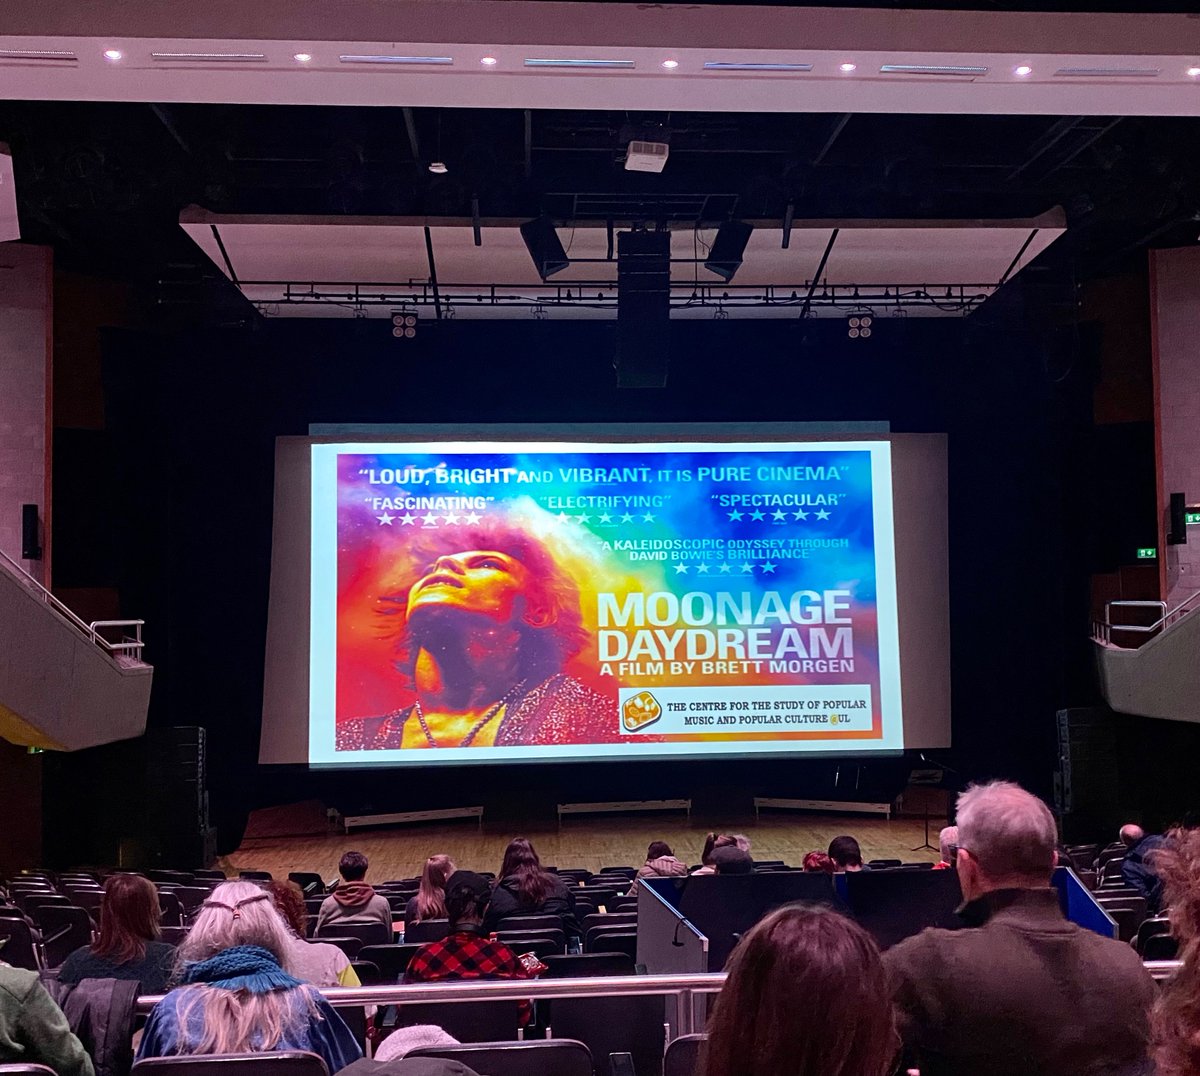 Nice cowd for the screening of Brett Morgan’s David Bowie doc, “Moonage Daydream” @UCHLimerick. Expansive intro by @ProfDevereux @CSPMPCatUL. @UL students of ‘Critical Encounters w/ Pop Music & Dance’ class in attendance to engage/review. #ResearchLedTeaching #PopMatters #Bowie